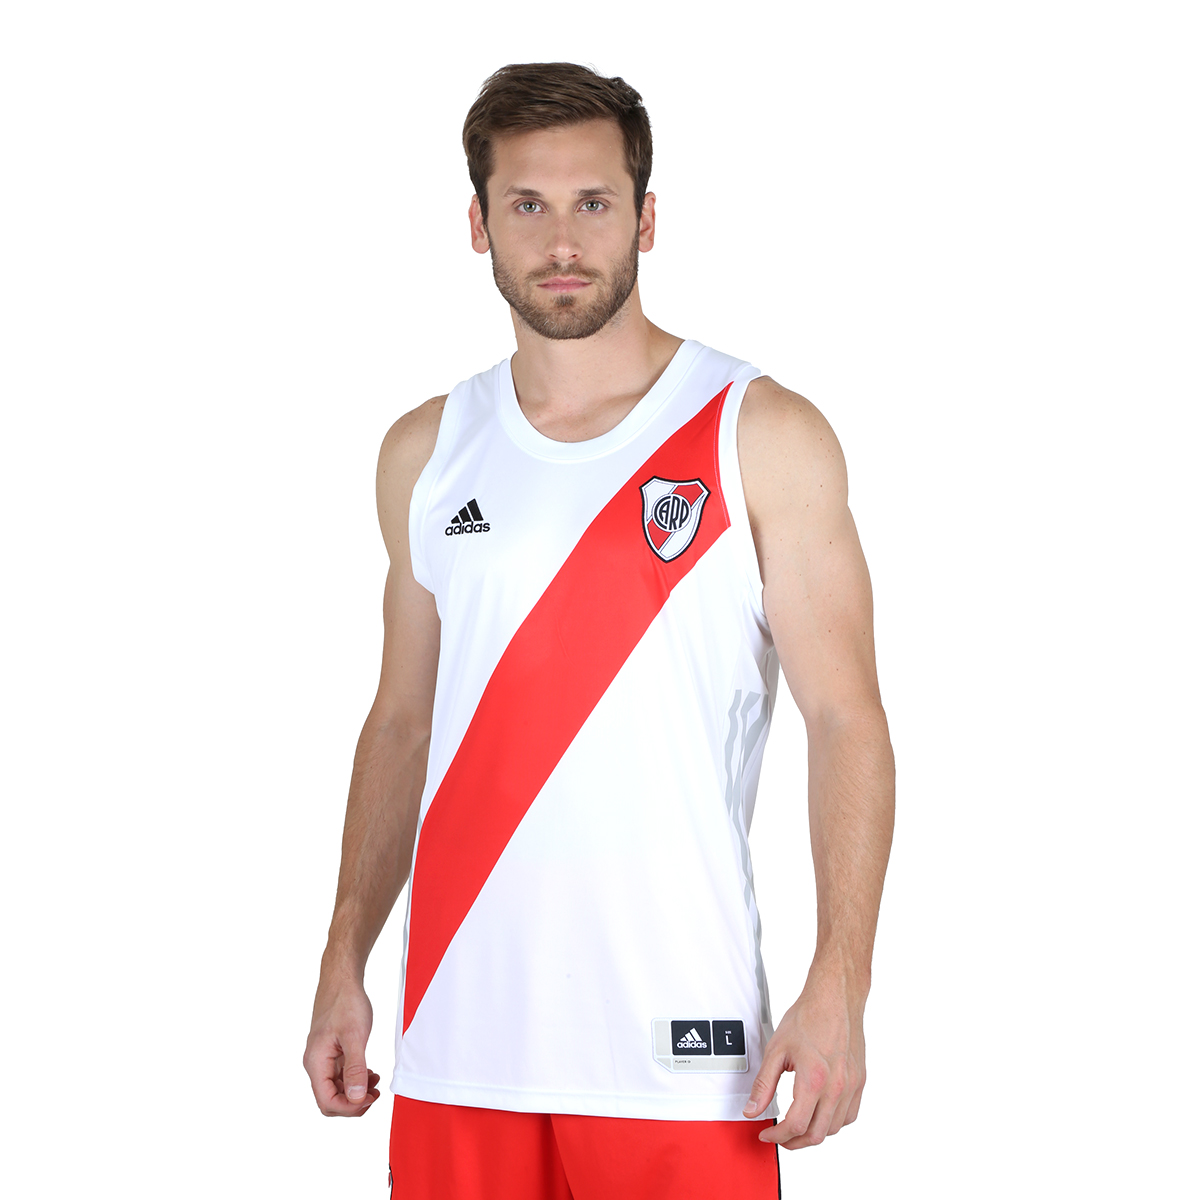 Musculosa adidas Plate Home 2021 | StockCenter